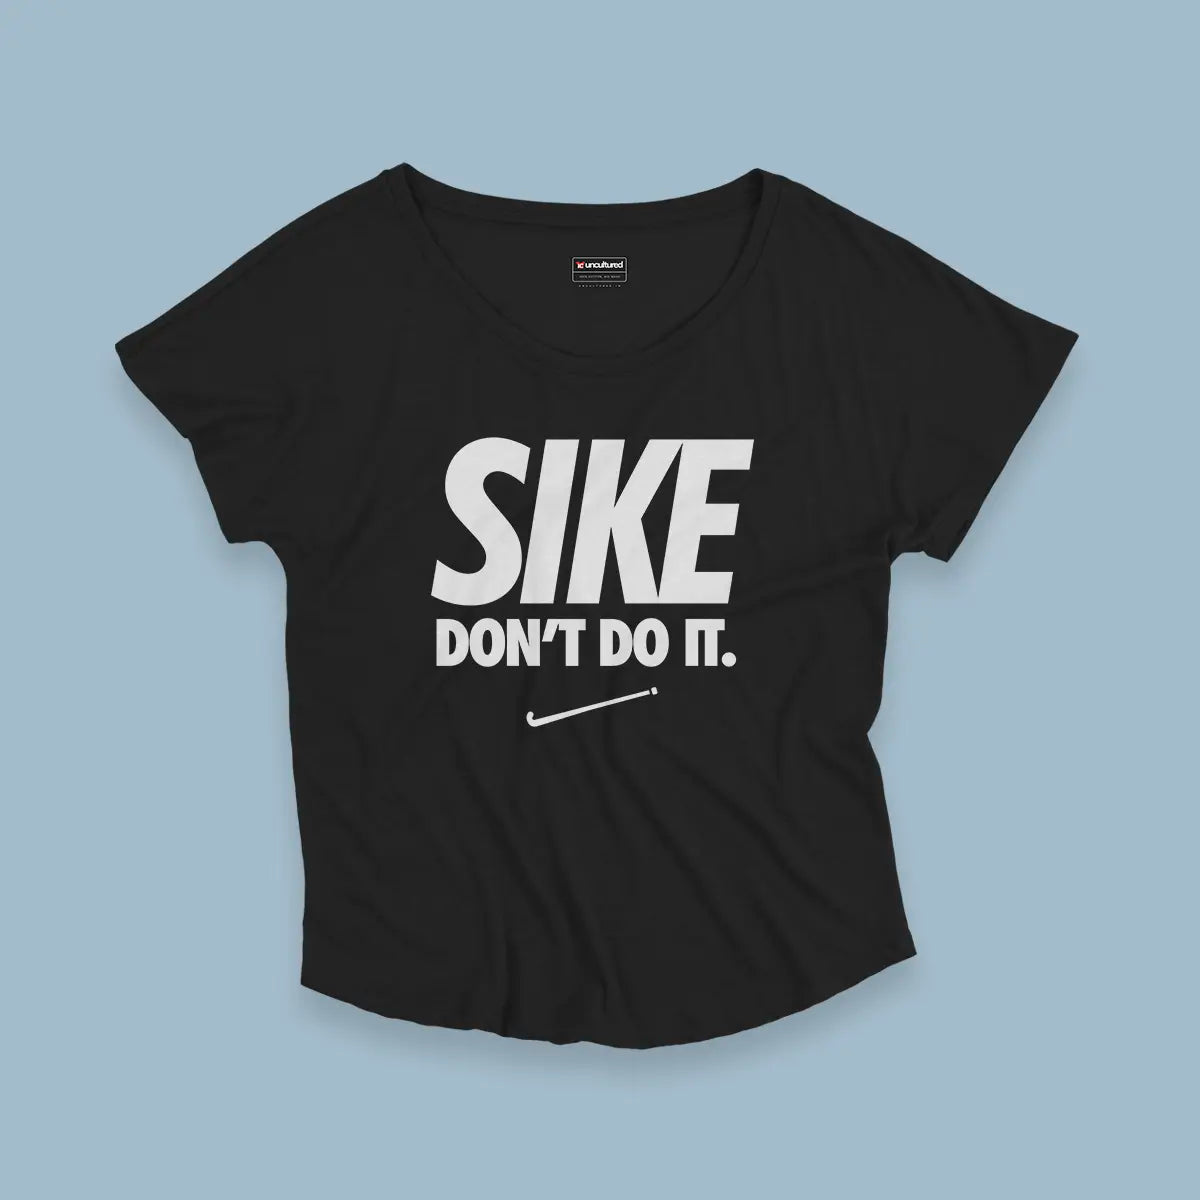 Sike don't do it - Croptop